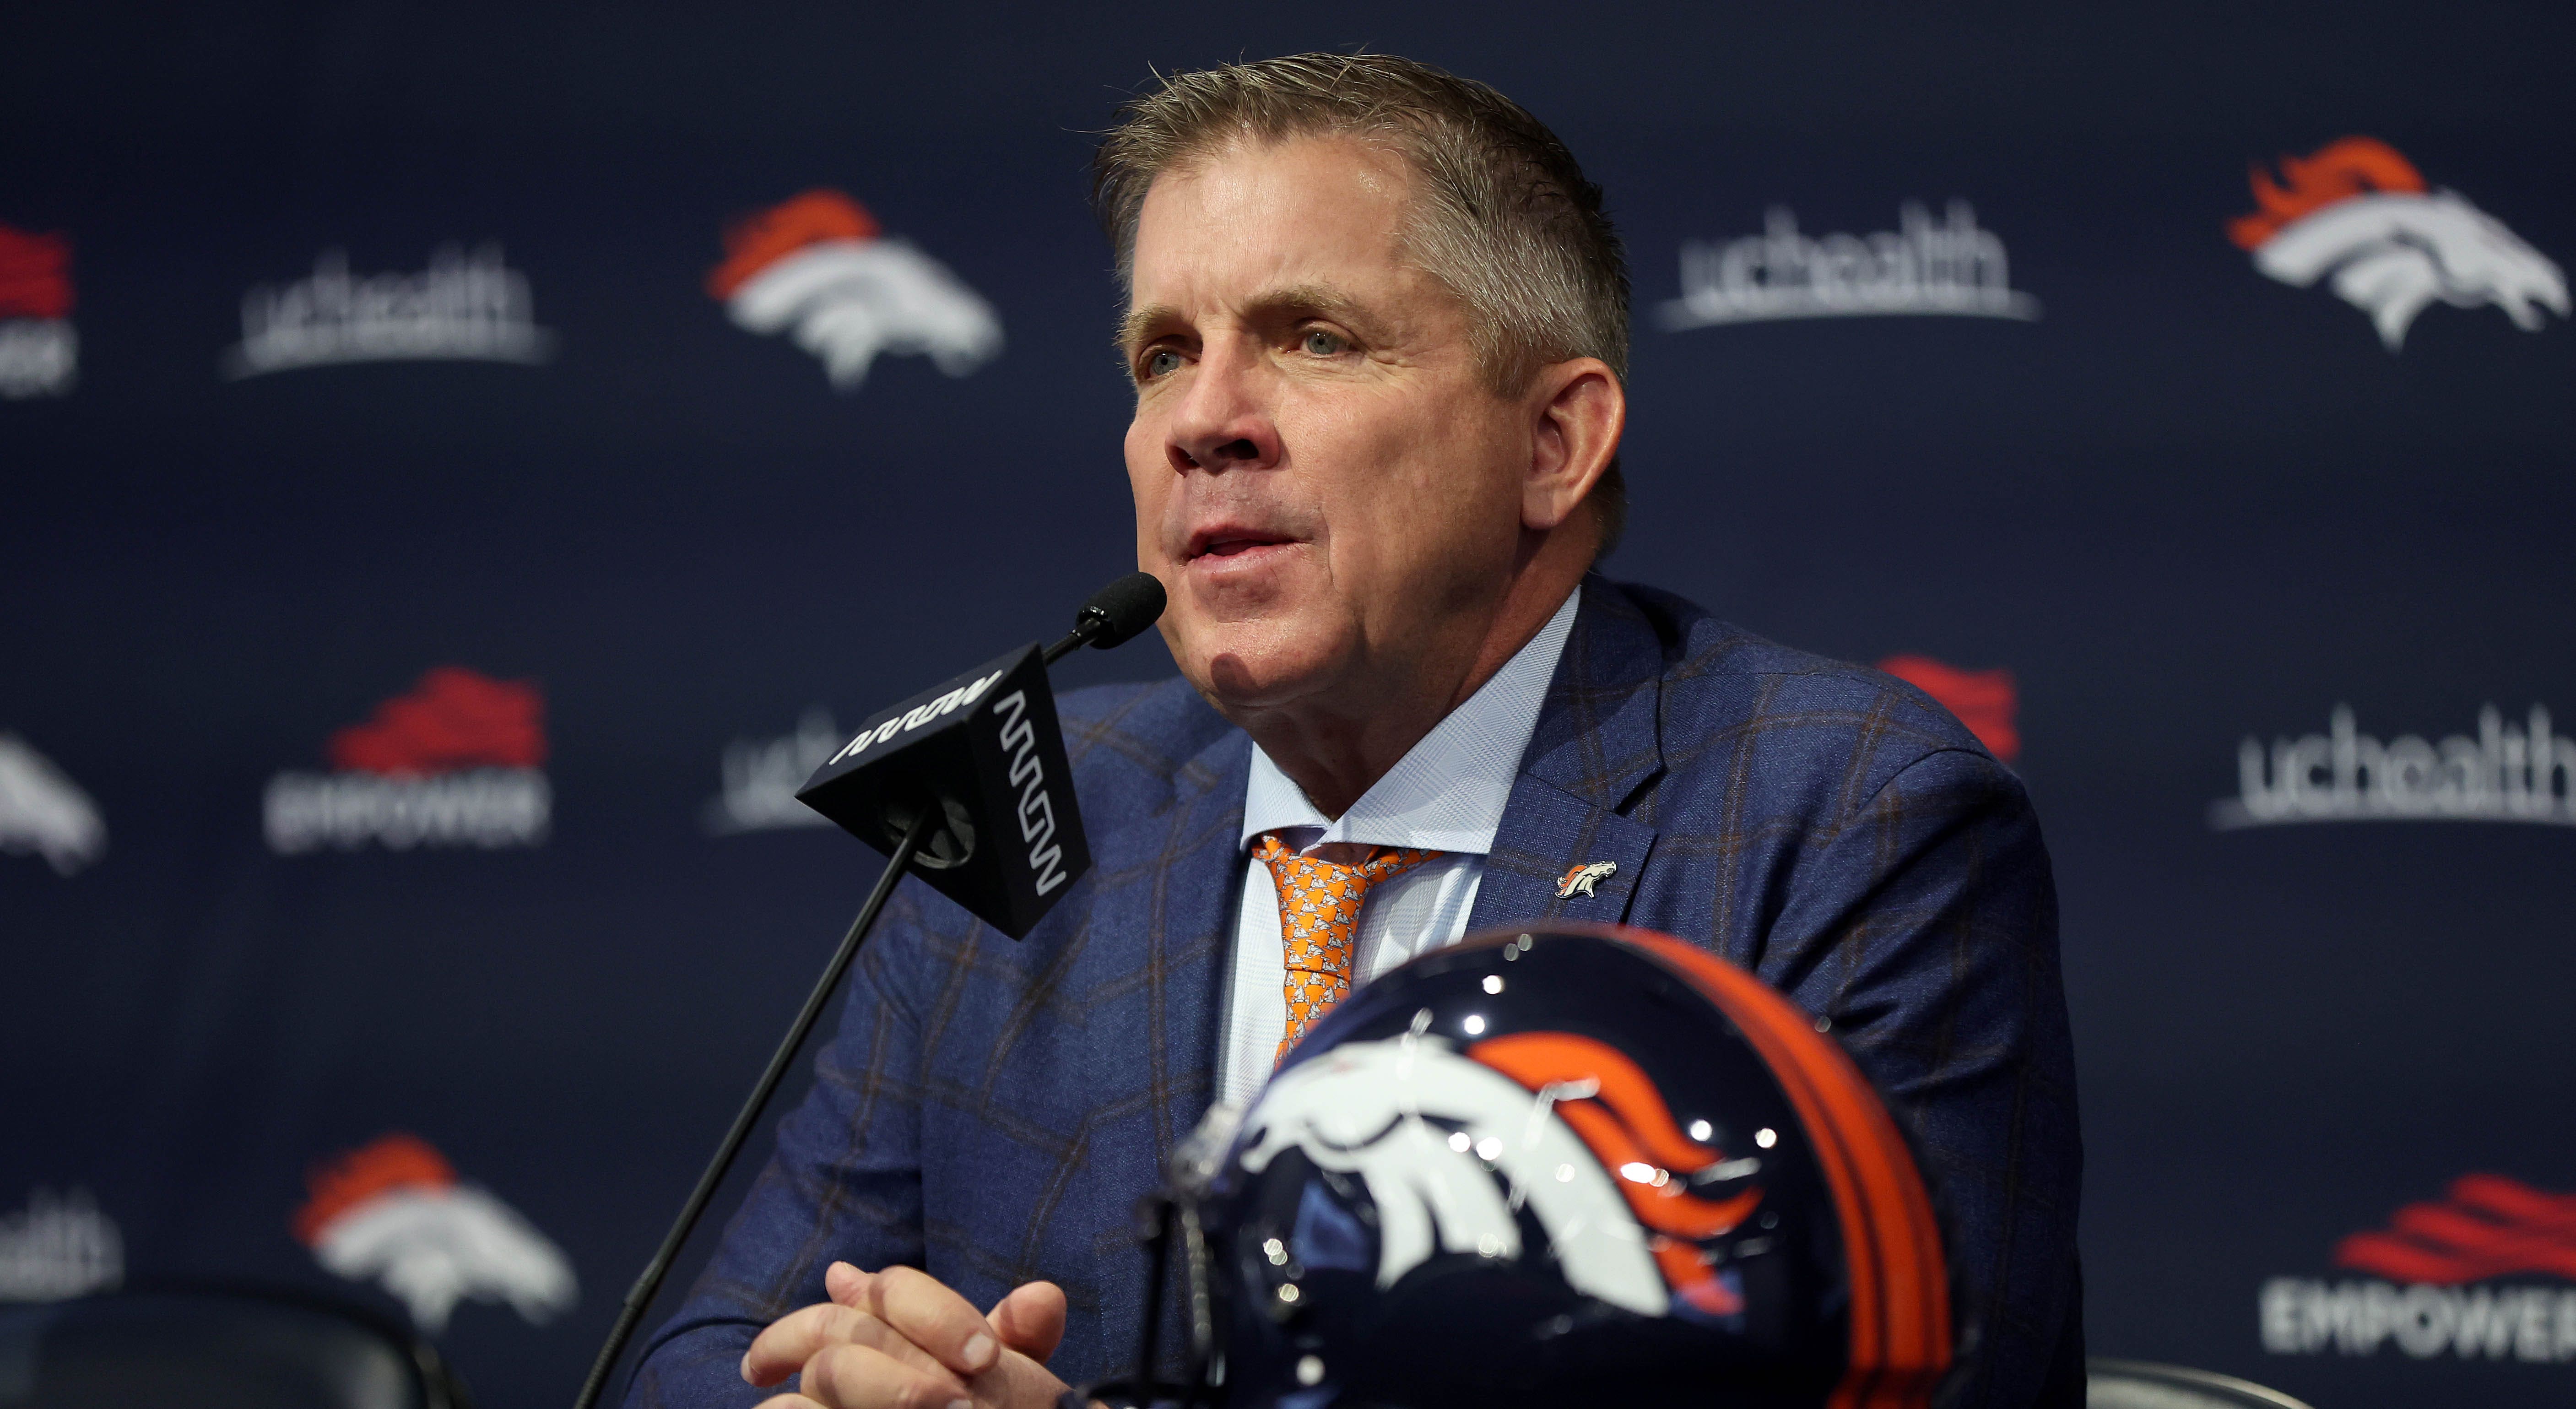 Broncos' Sean Payton bans personal coaches from locker room, including star QBs: 'That's foreign to me' - Fox News